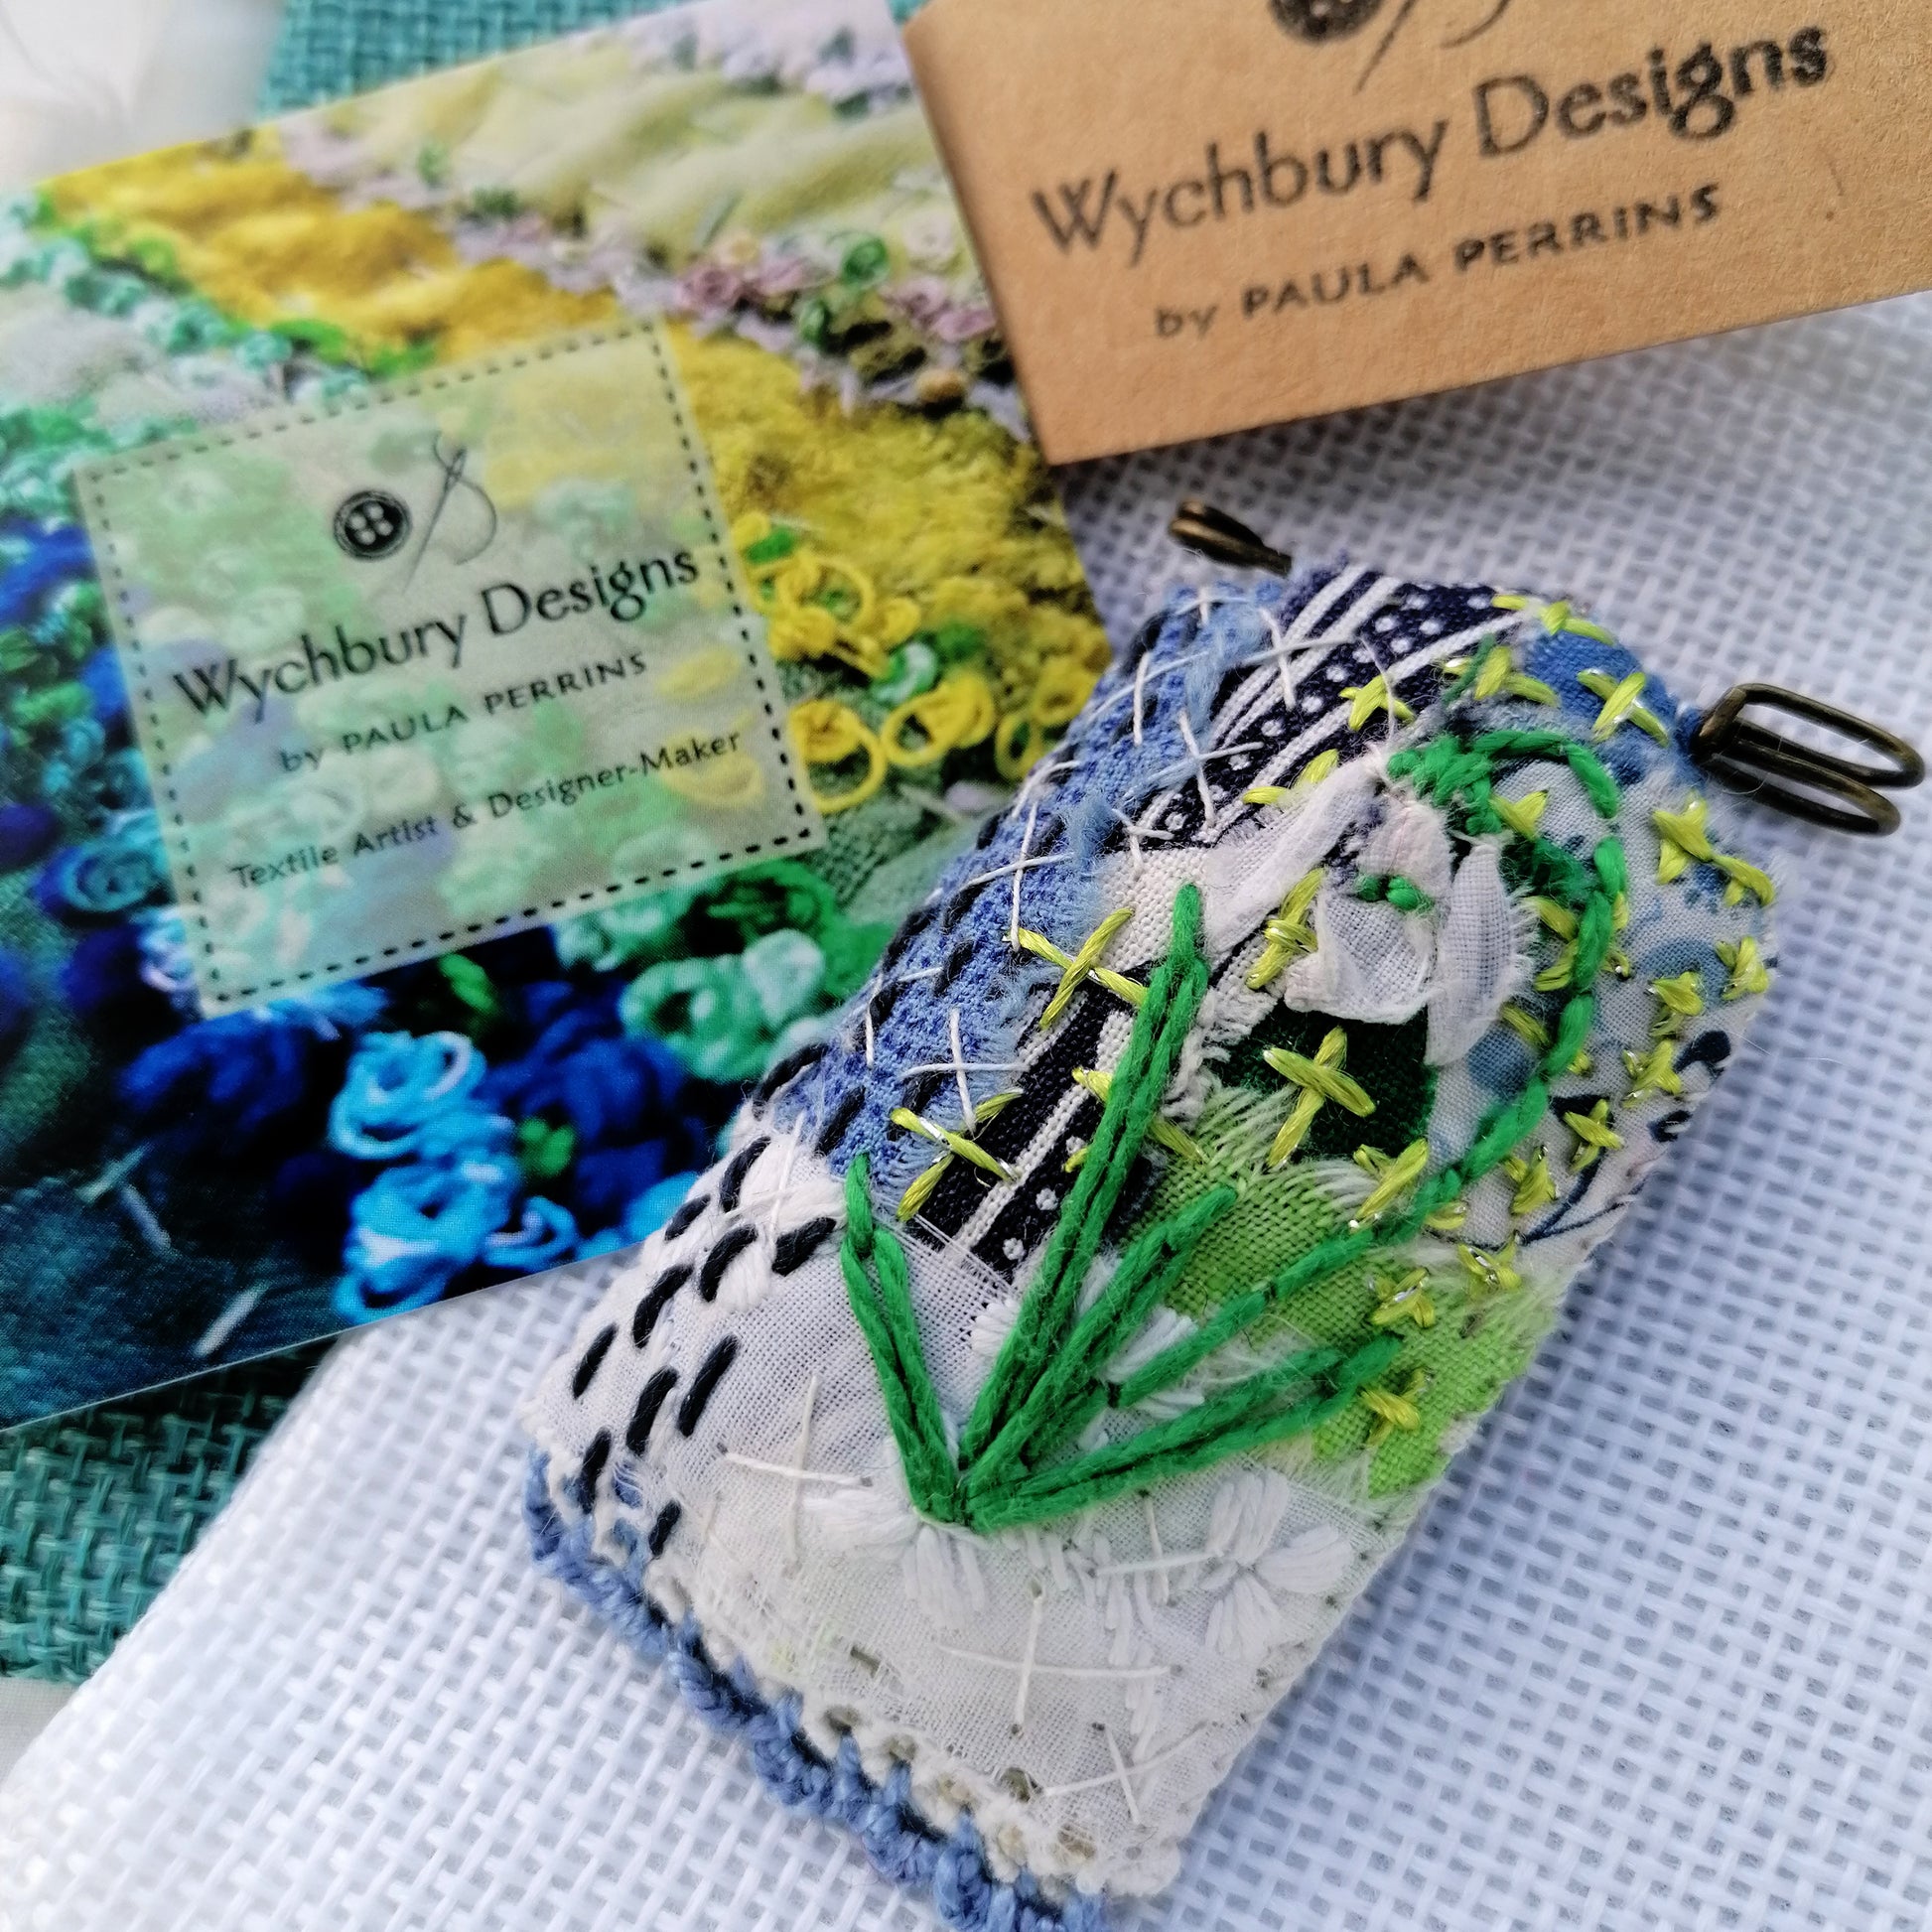 Tag shaped, padded and embroidered snowdrop brooch 2 on vintage style bronze tone kilt pin. pictured with gift bag and business card.